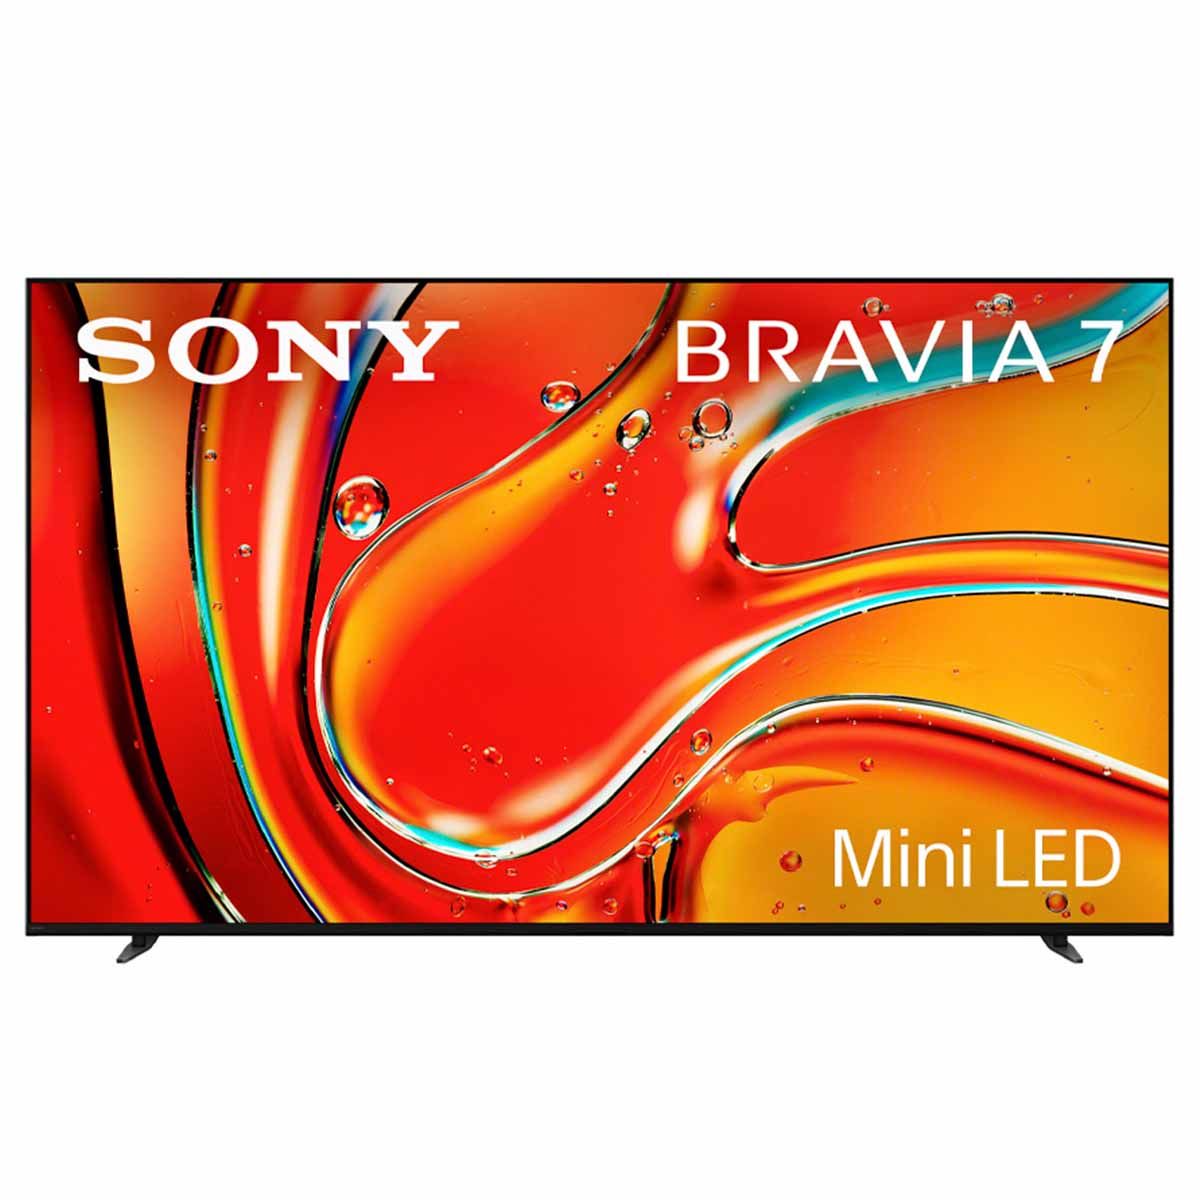 Sony BRAVIA 7 Mini LED QLED 4K HDR Google TV (2024) - front view with Sony text